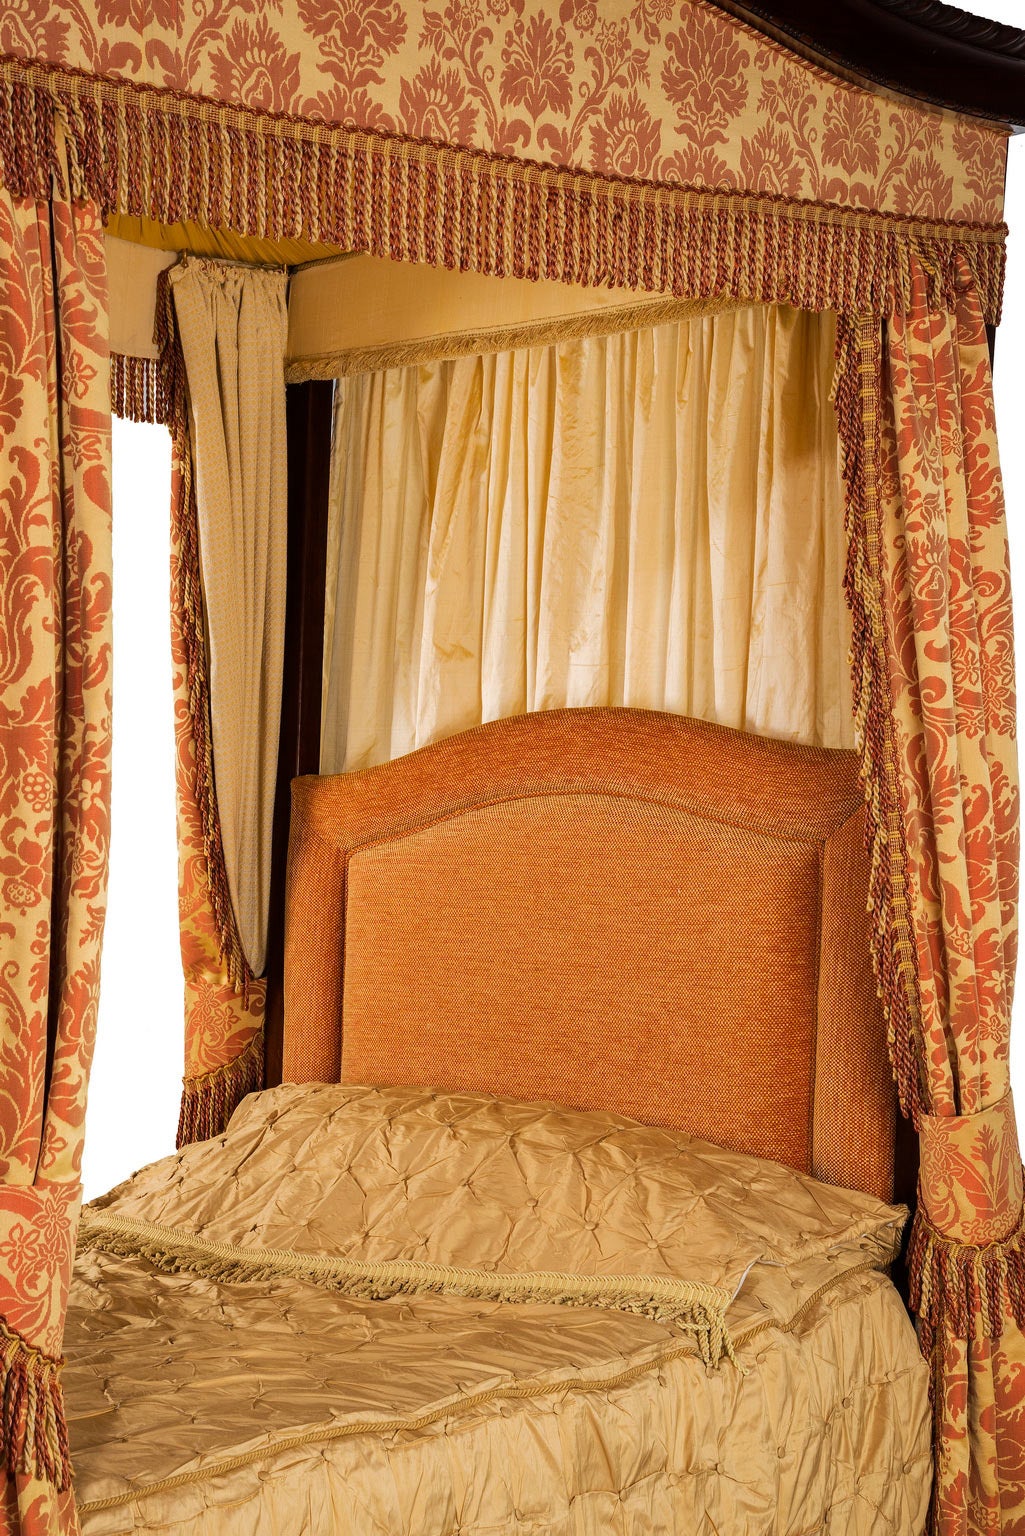 19th century and early 20 century beds